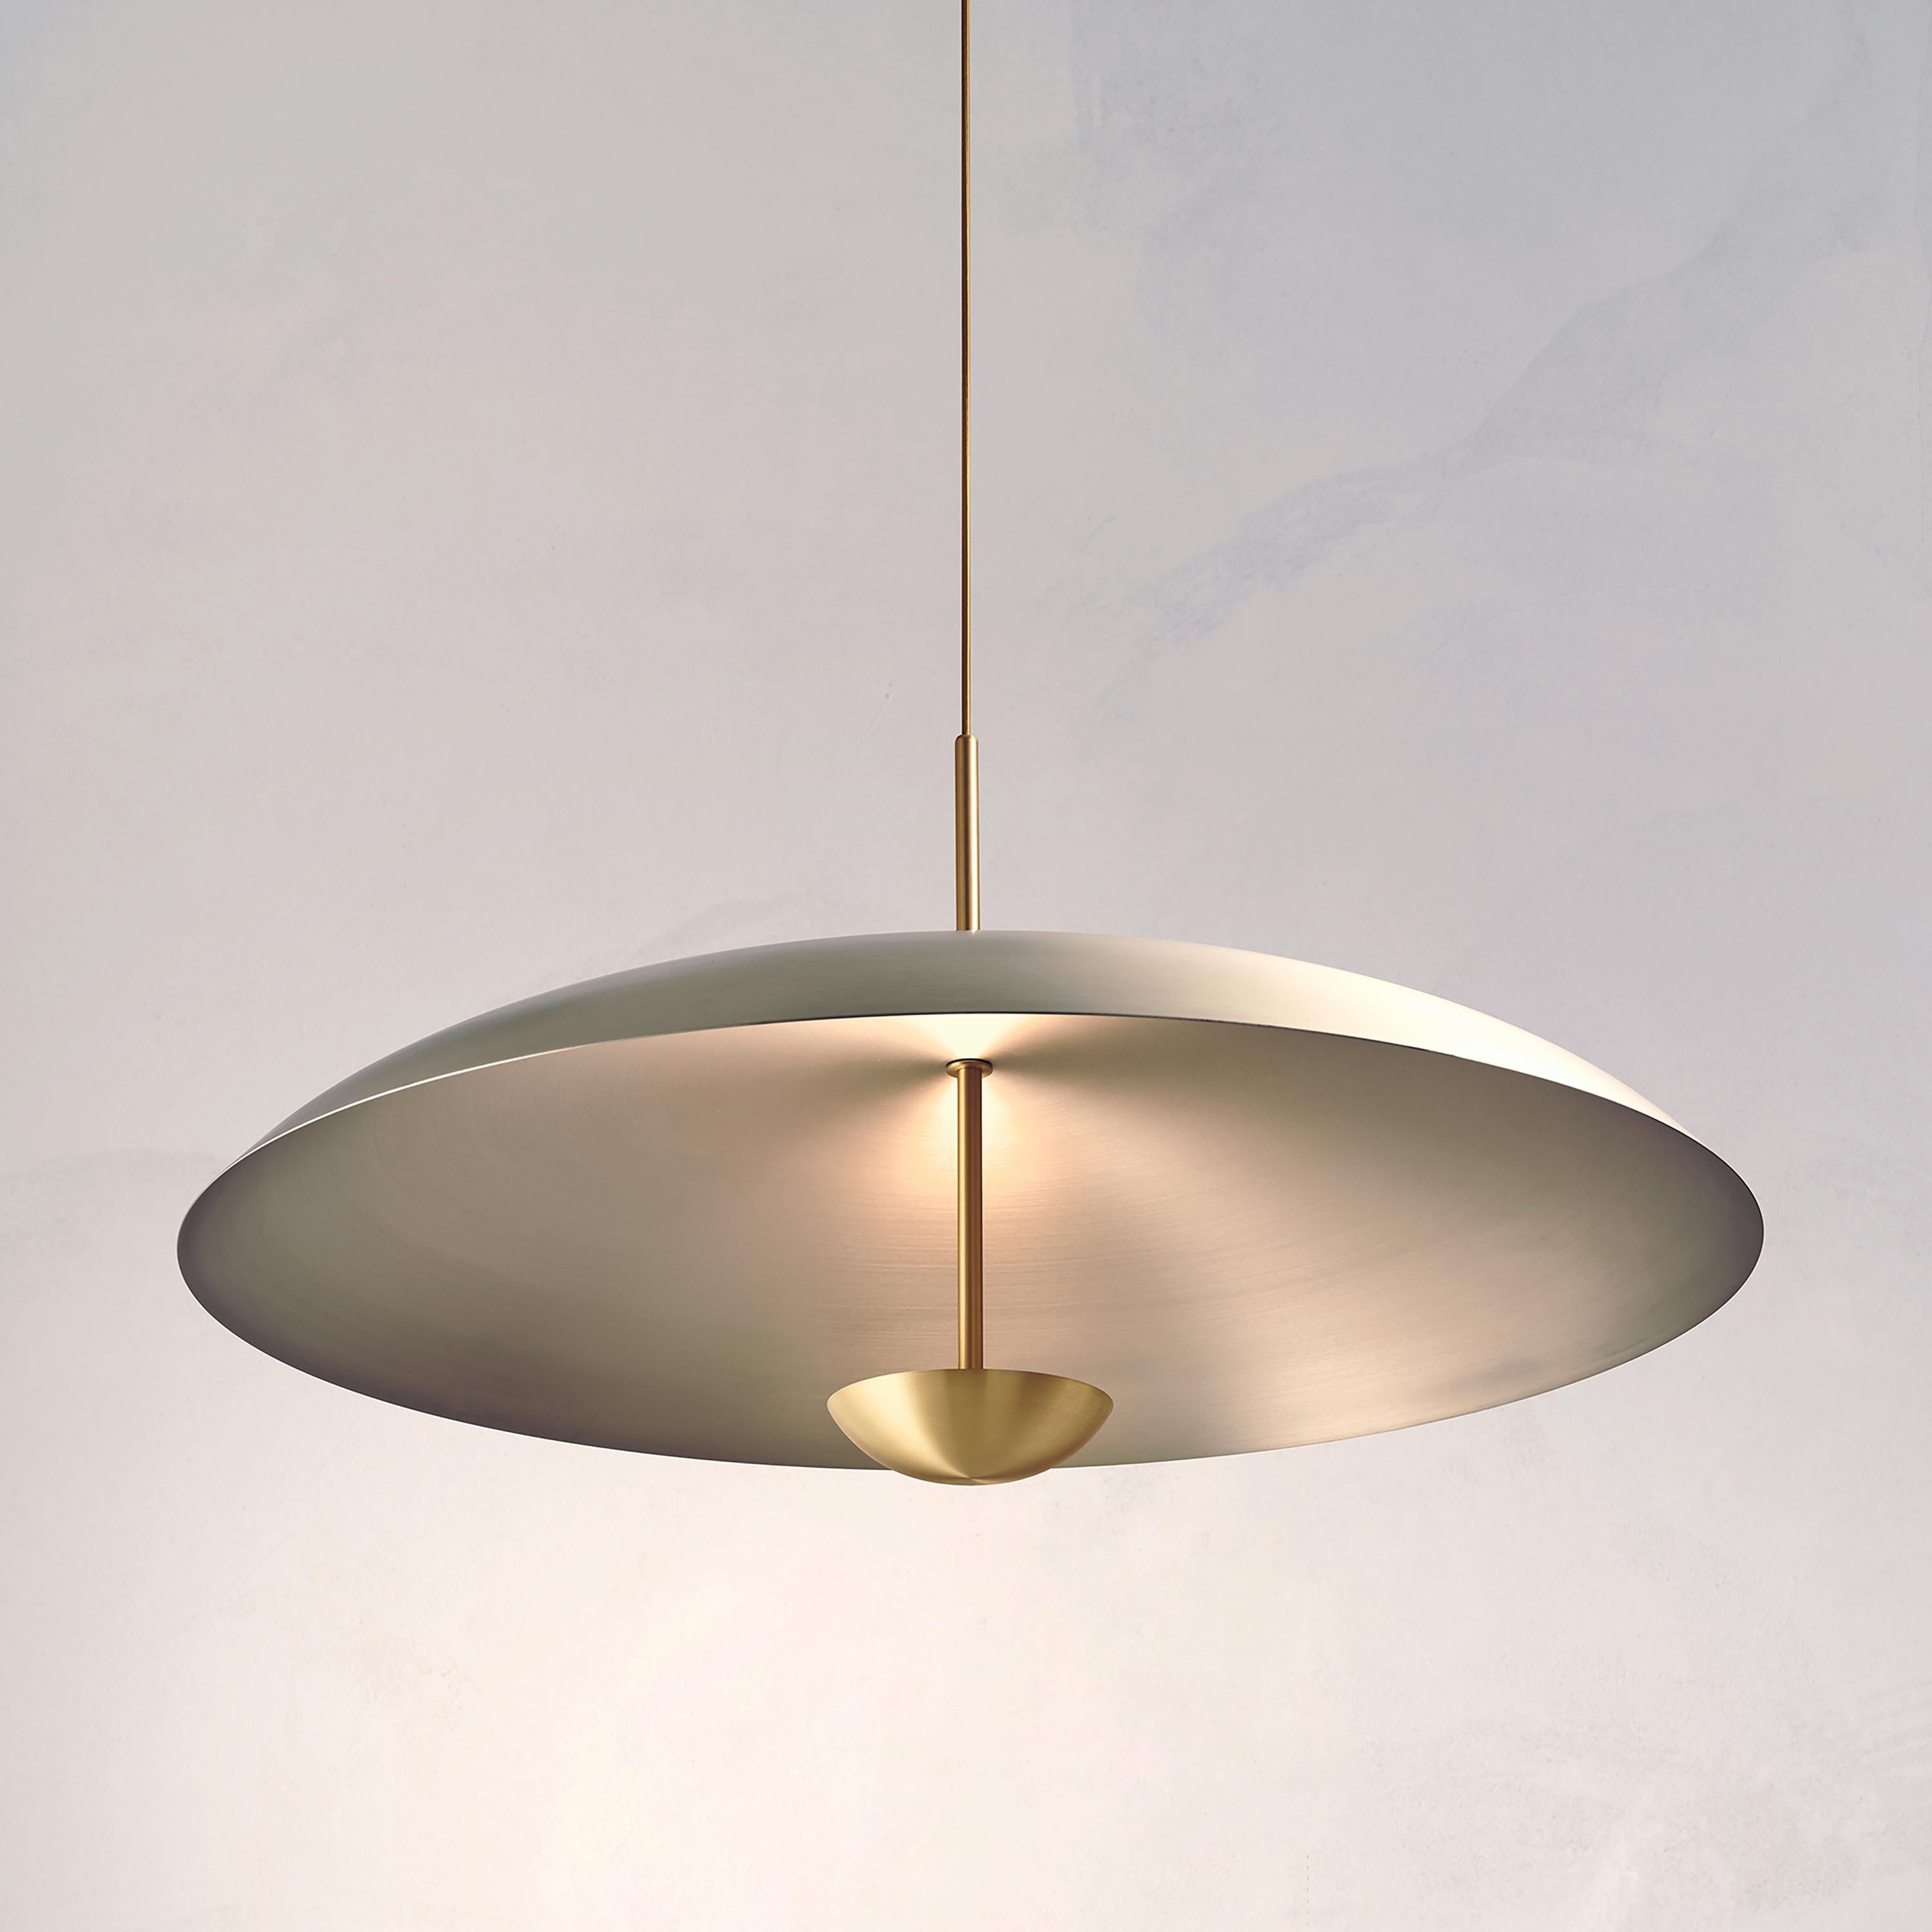 Inspired by planet-like shapes and textures, the Cosmic collection plays with both metal properties and a selection of patina finishes.
 
Composed with two carefully hand-spun plates, the Seleno Pendant preserves the beautiful texture and qualities